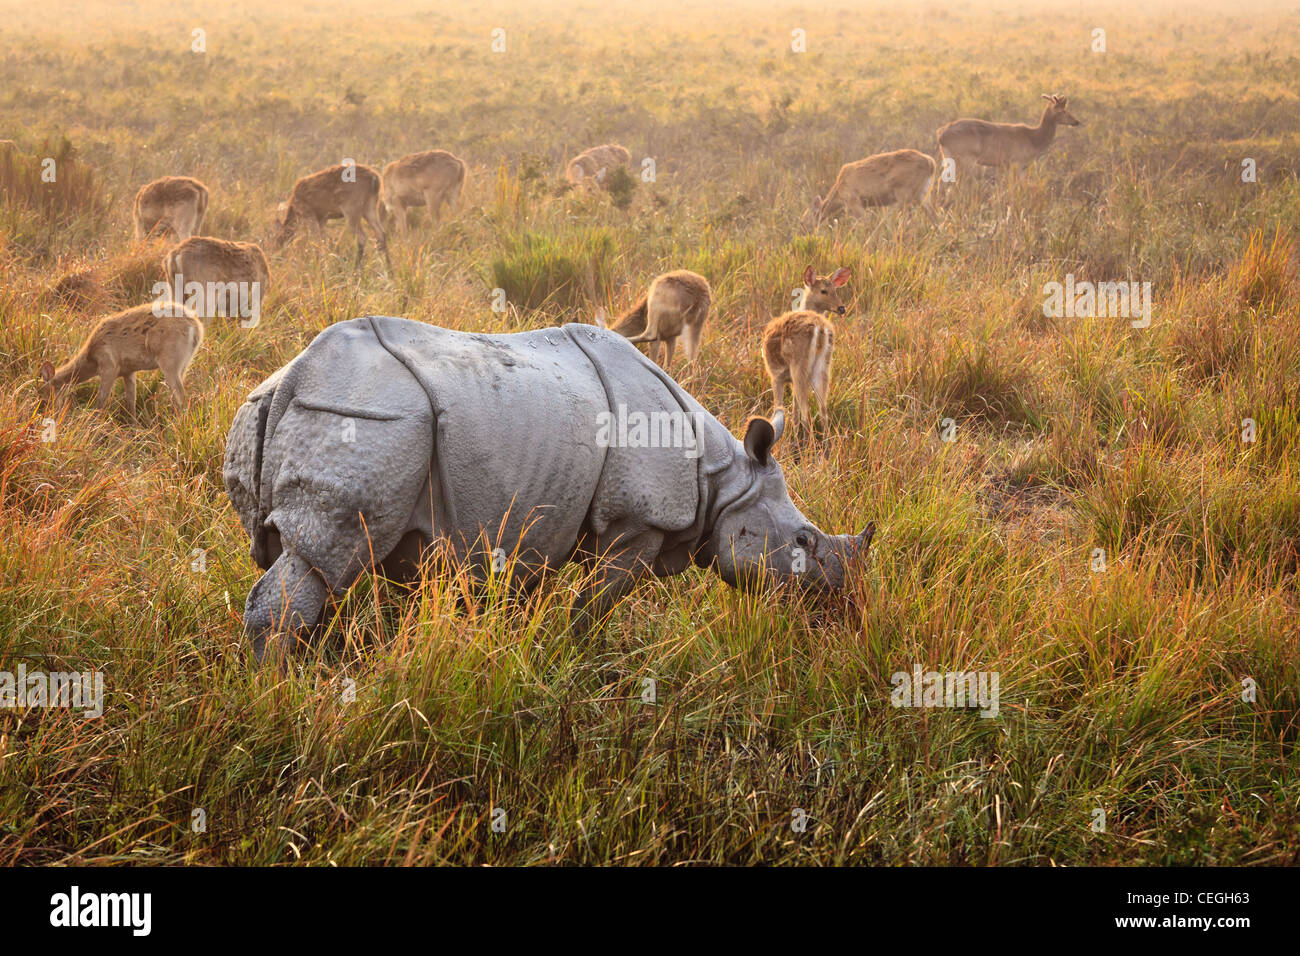 An Indian Rhinoceros in front of a group of hog deer Kaziranga National Park, Assam, India Stock Photo